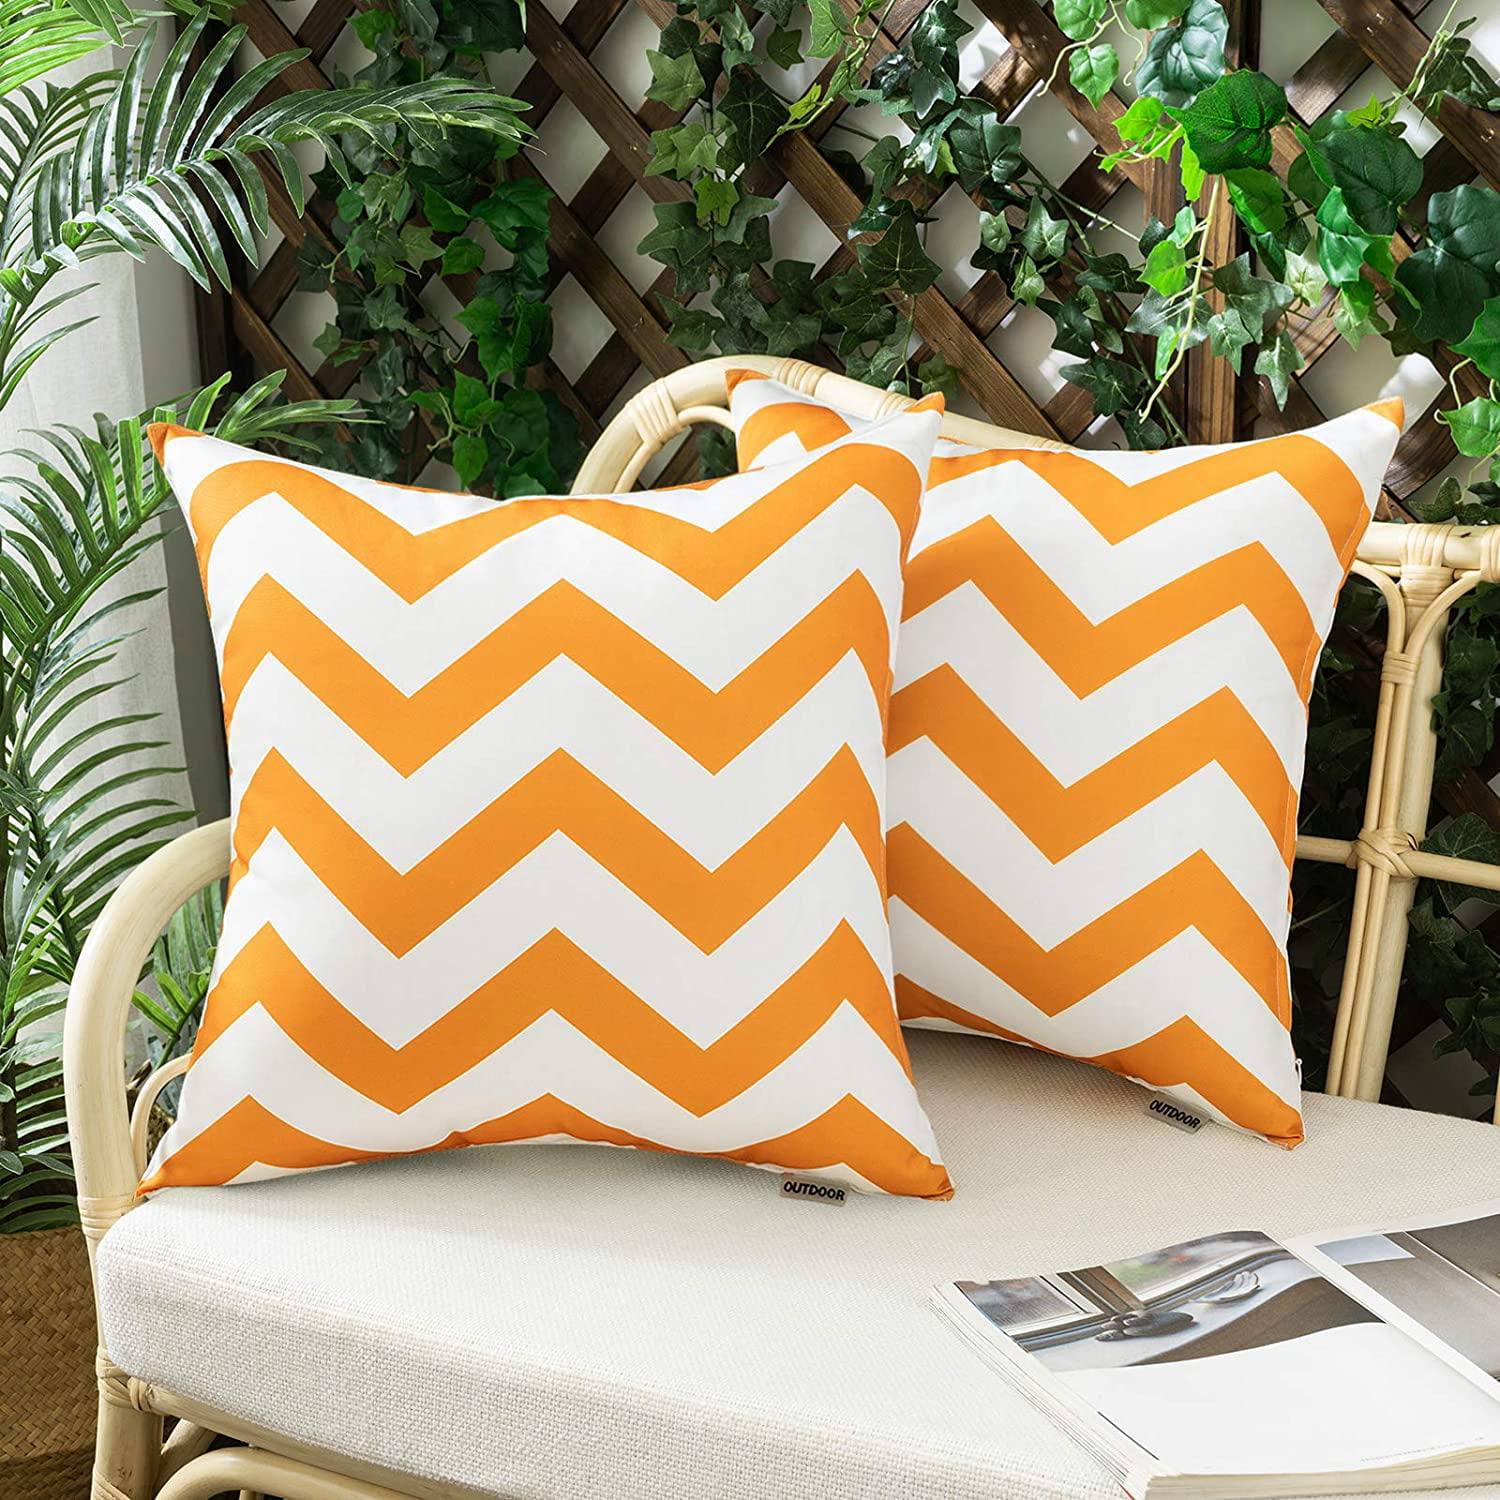 Woaboy Set of 2 Outdoor Waterproof Throw Pillow Covers Decorative Farmhouse Solid Cushion Cases for Patio Garden Sofa Chairs Beige 16x16 inch 